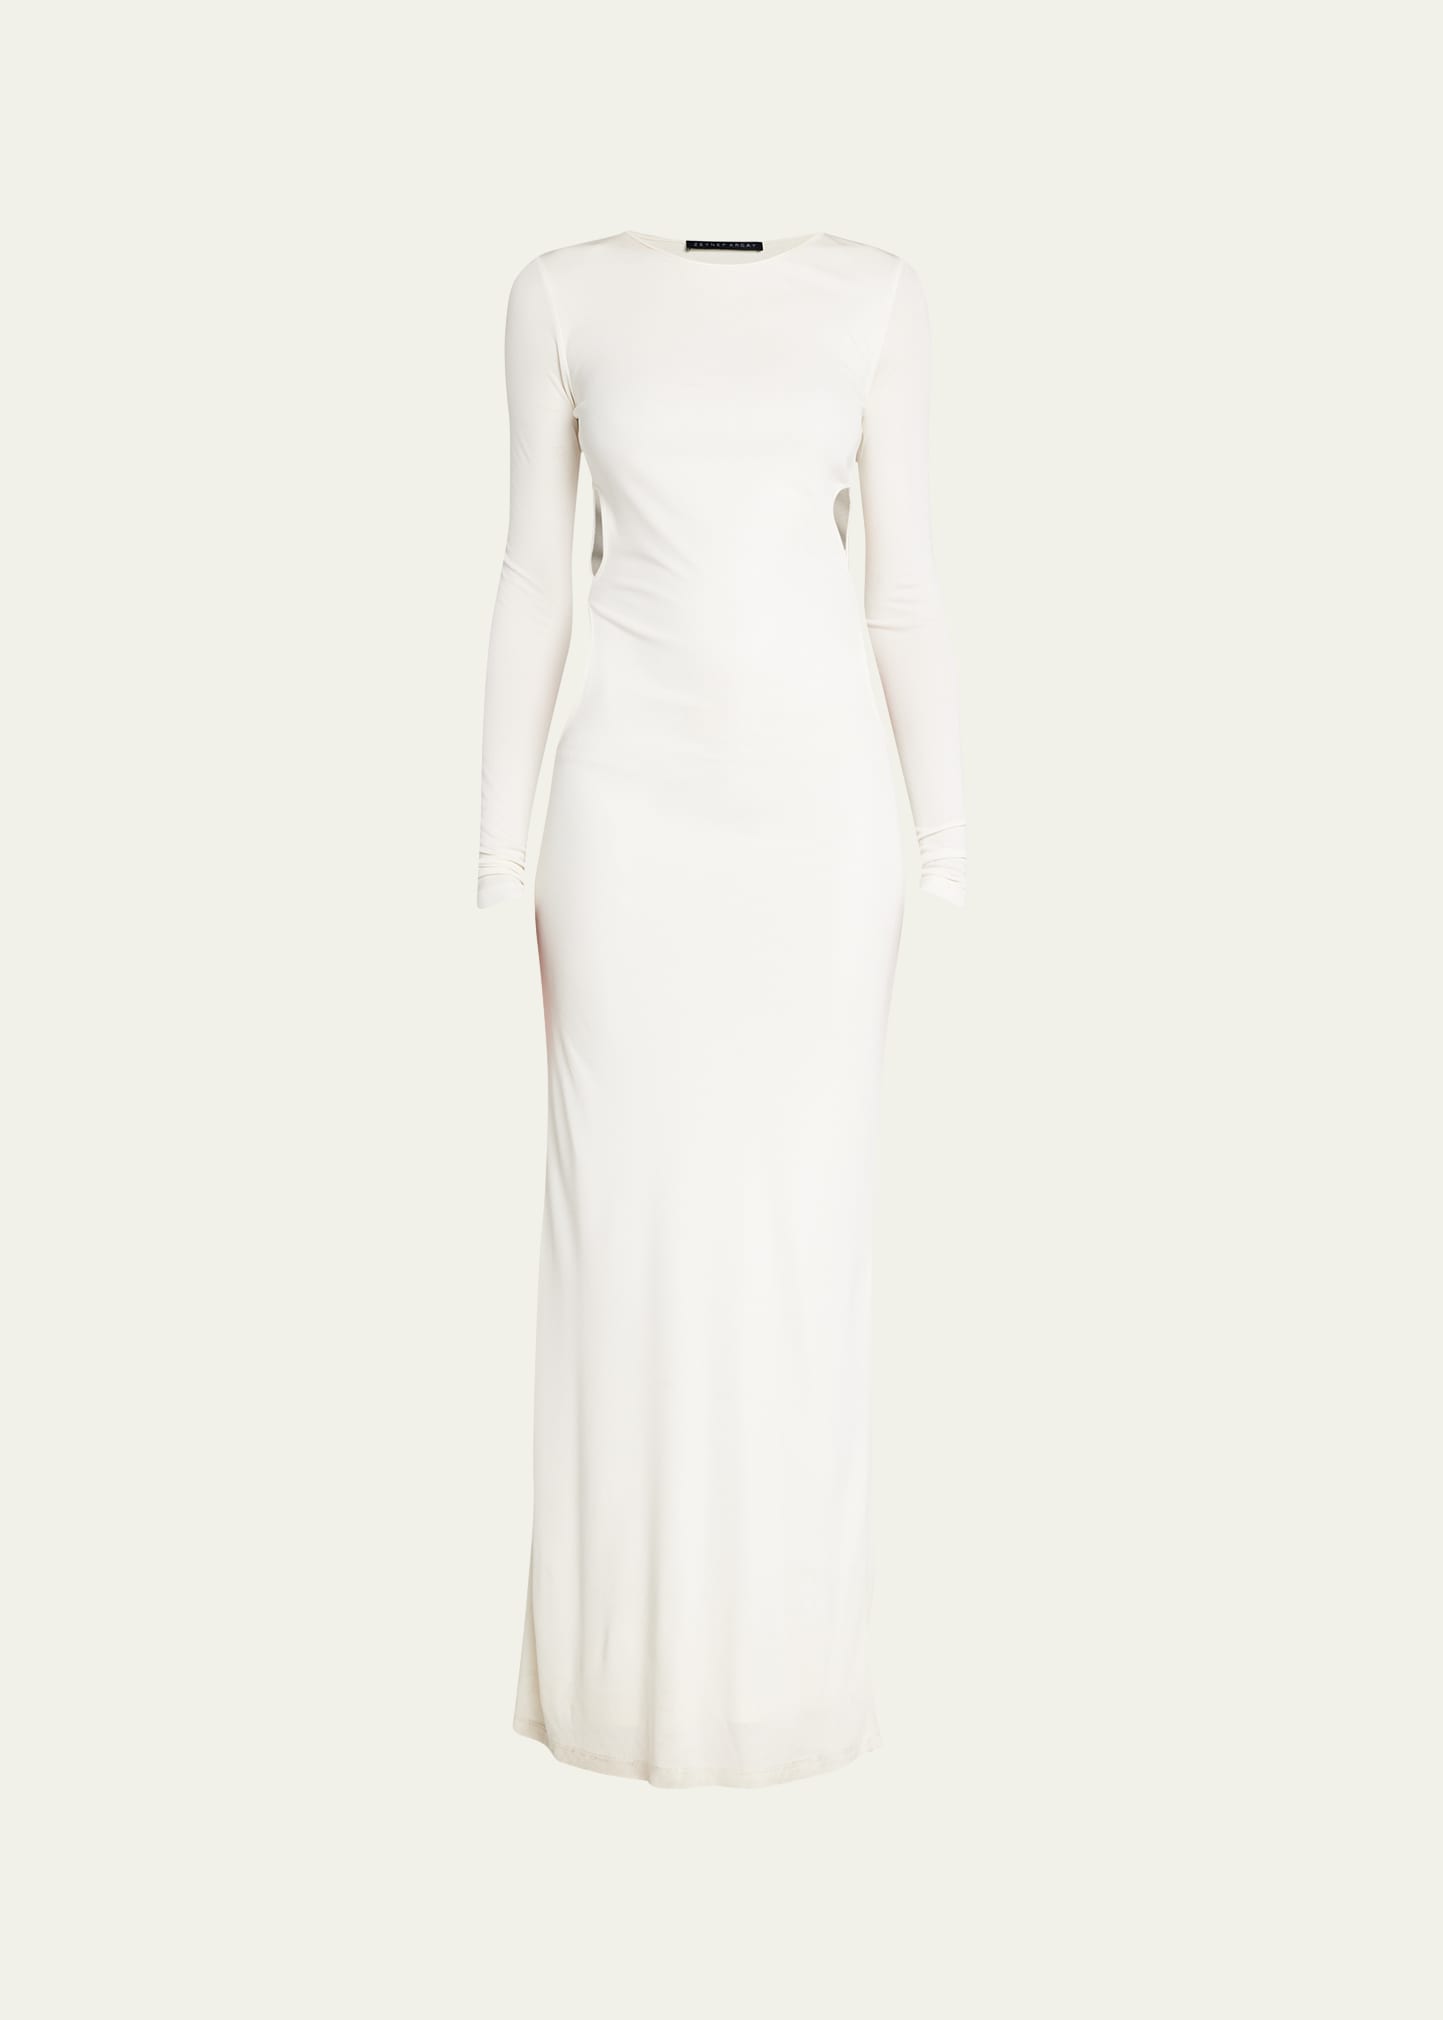 Zeynep Arcay Infinity Jersey Dress With Cutout Detail In White